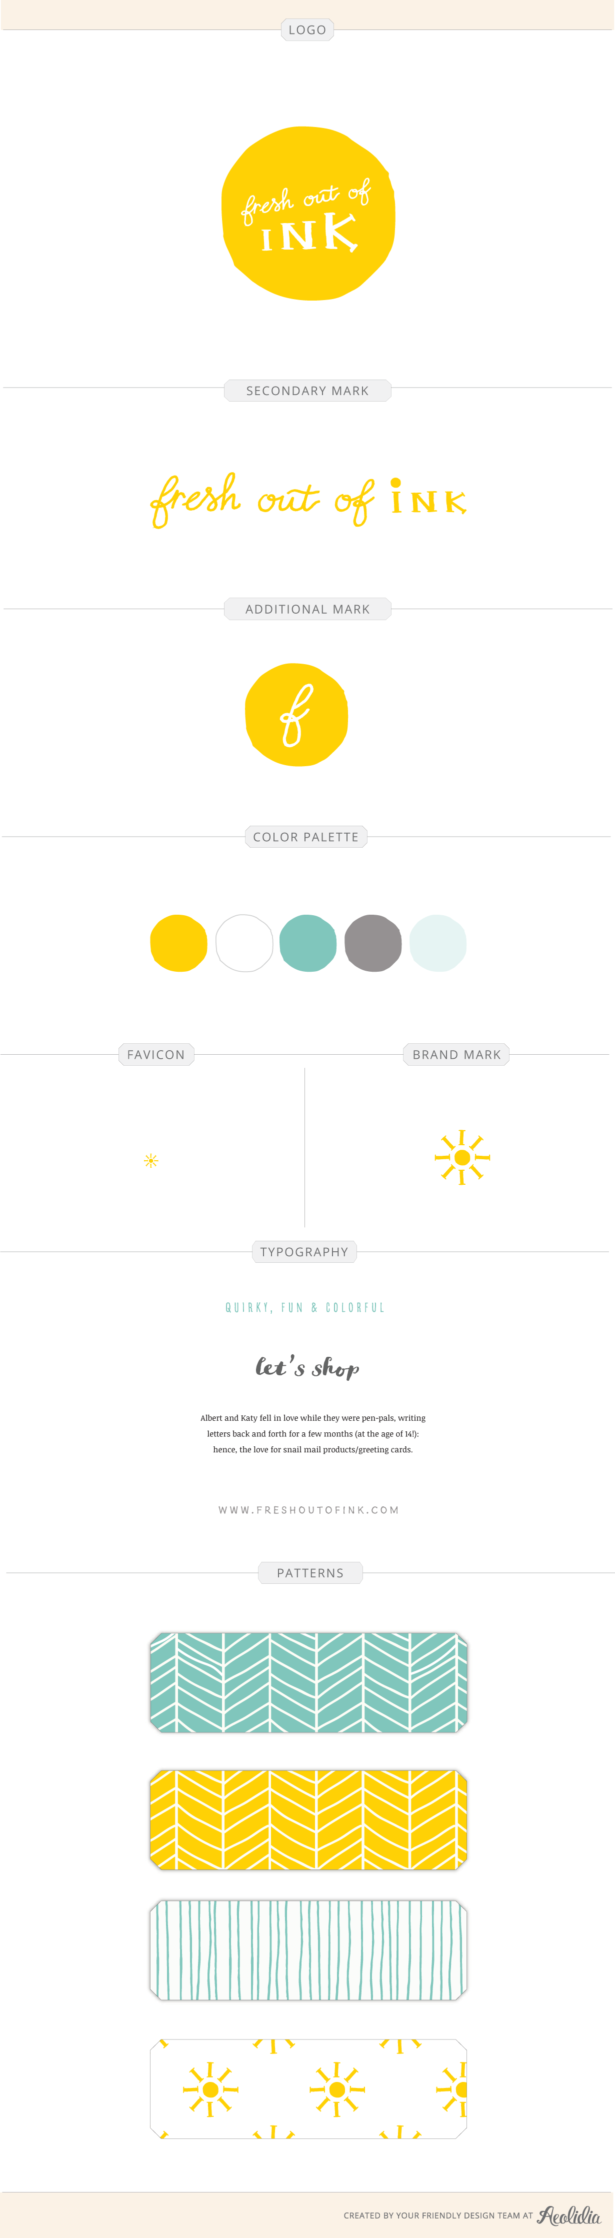 How to start a new stationery shop; shown here is a brand style guide for a stationery shop.